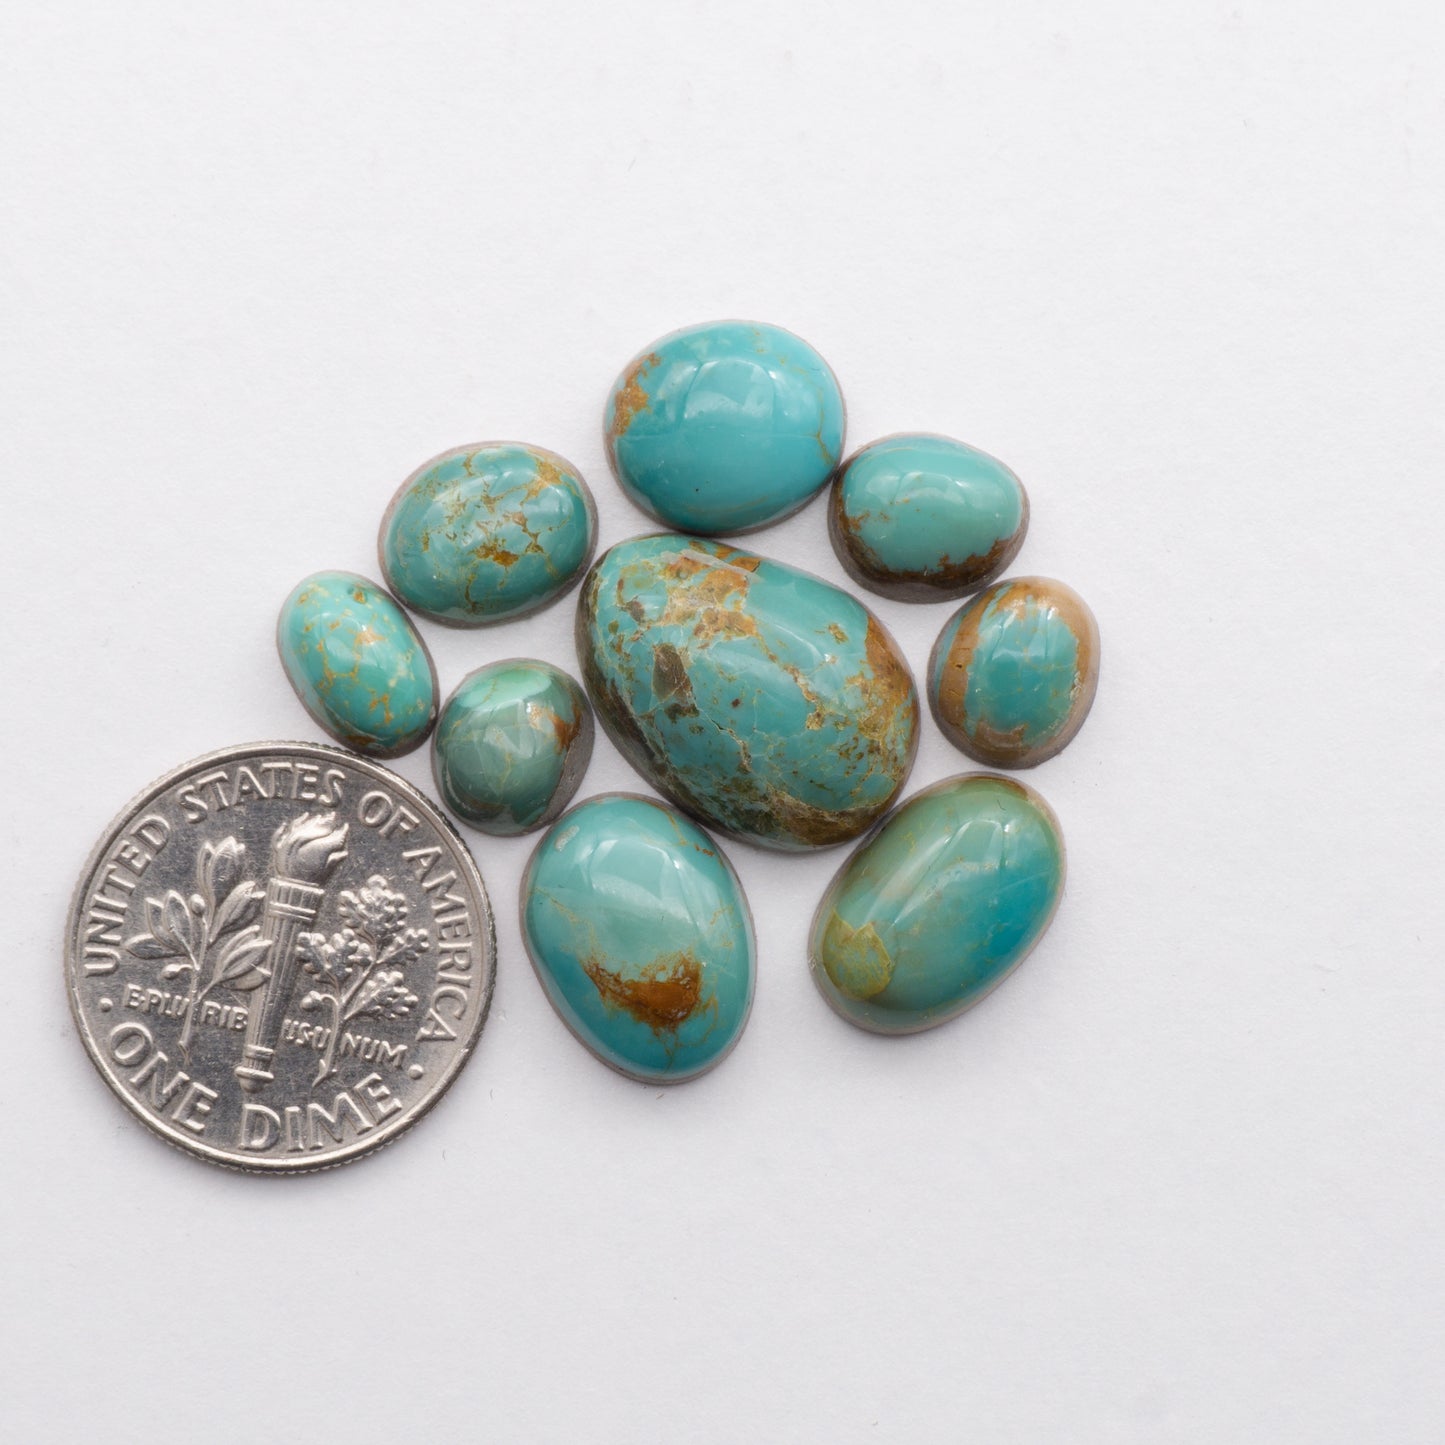 Kings Manassa Turquoise is a type of turquoise known for its characteristic green-blue hue and unique veining.